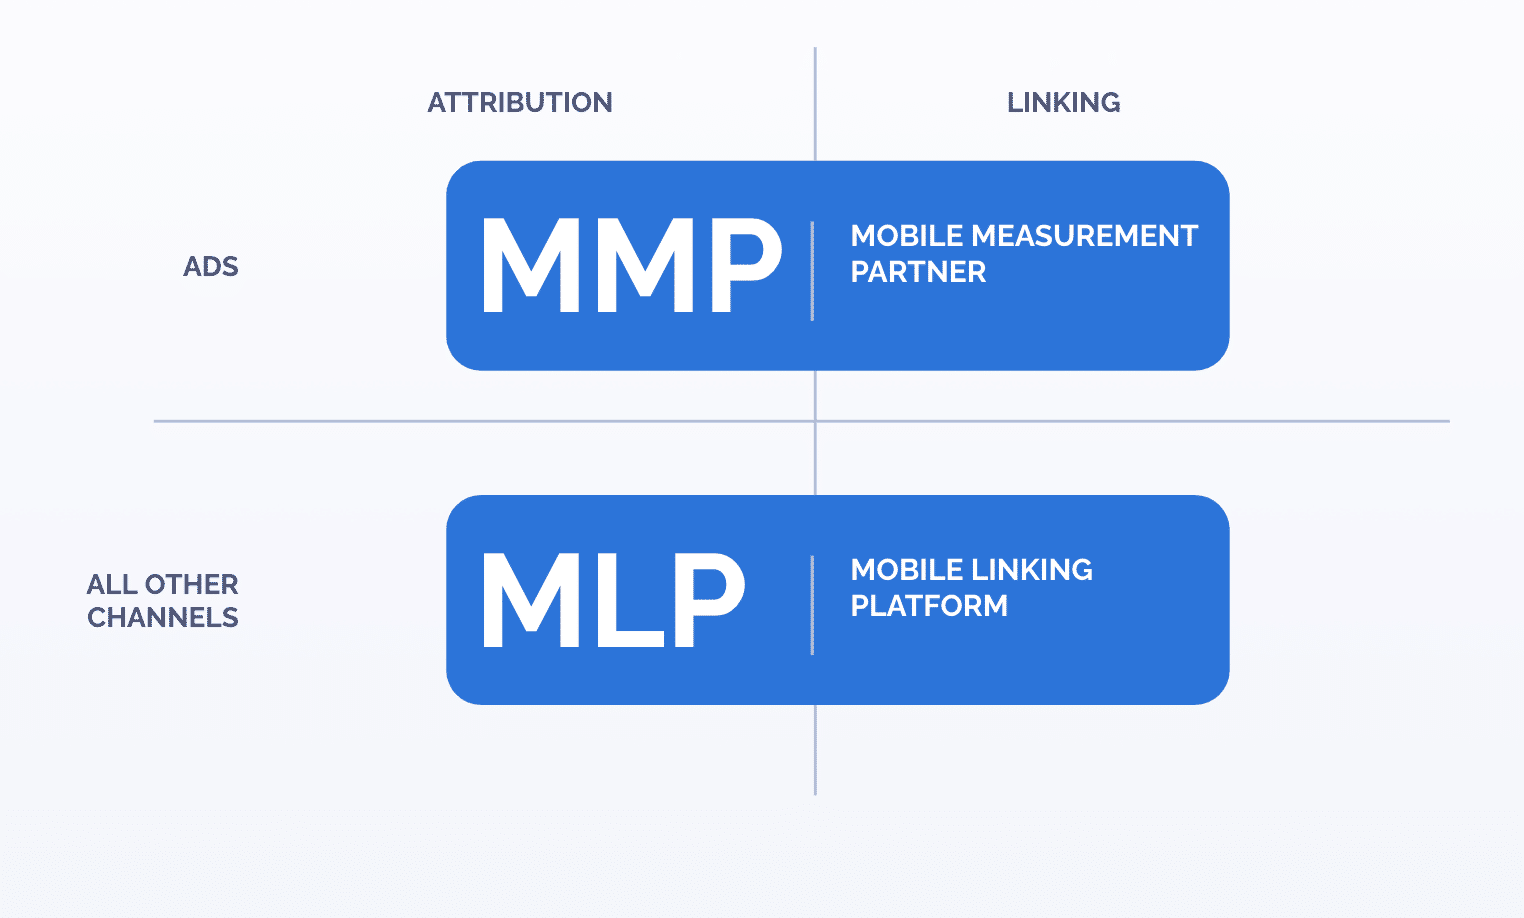 Image showing the distinction between MMPs and MLPs. MMPs: Good for attaining information on attribution and linking for ads MLPs: Good for attain information on attribution and linking for all other channels